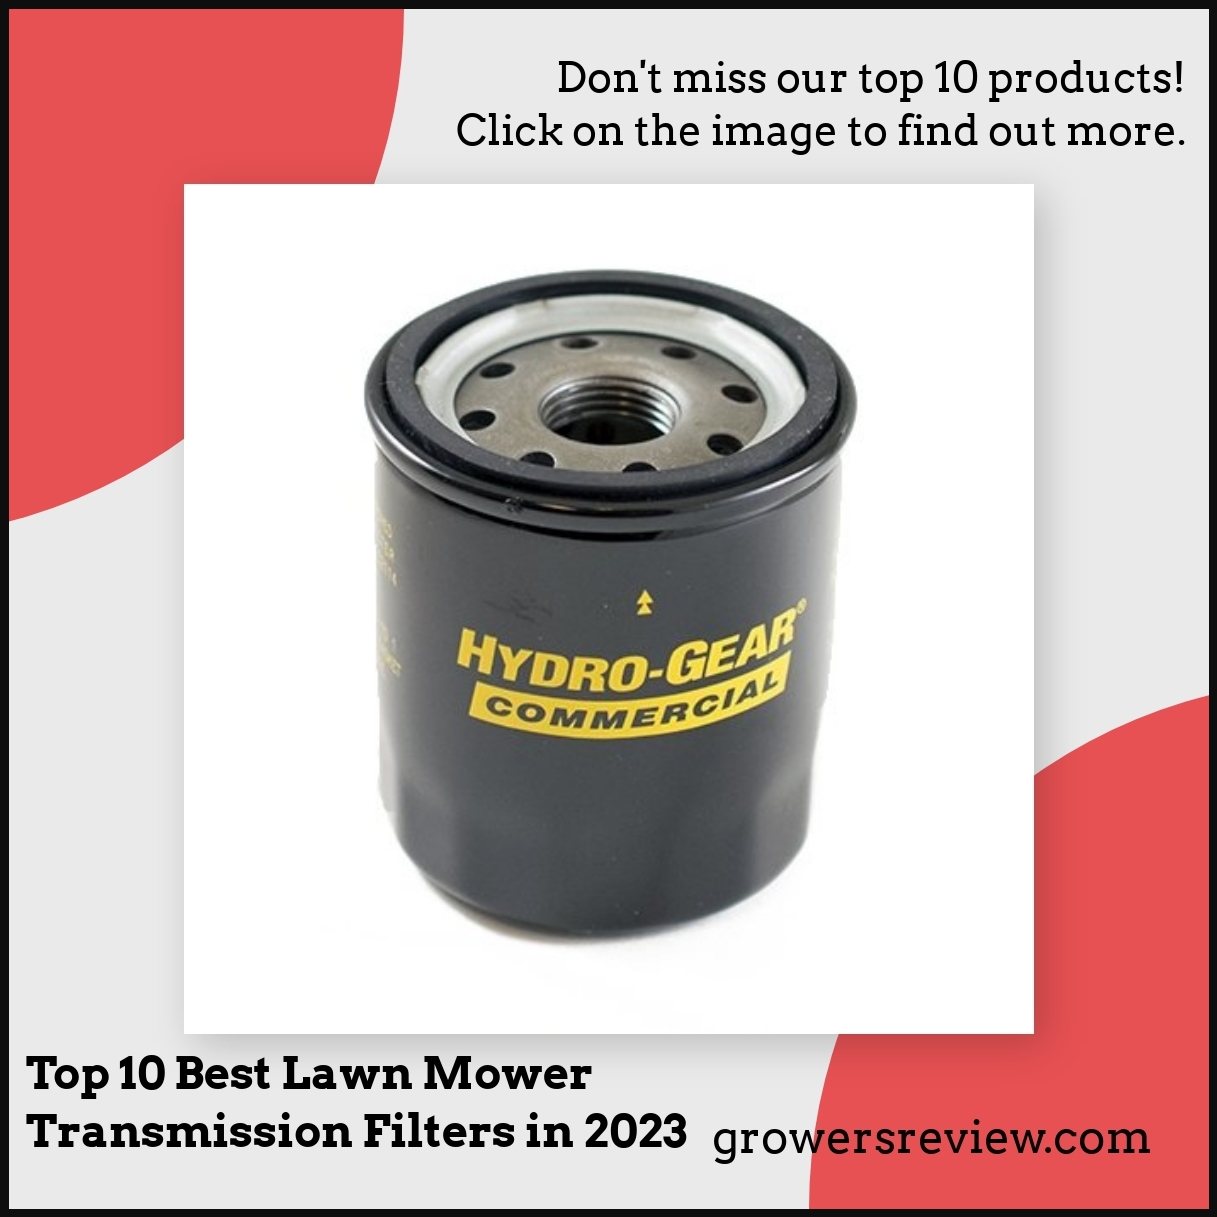 Top 10 Best Lawn Mower Transmission Filters in 2023